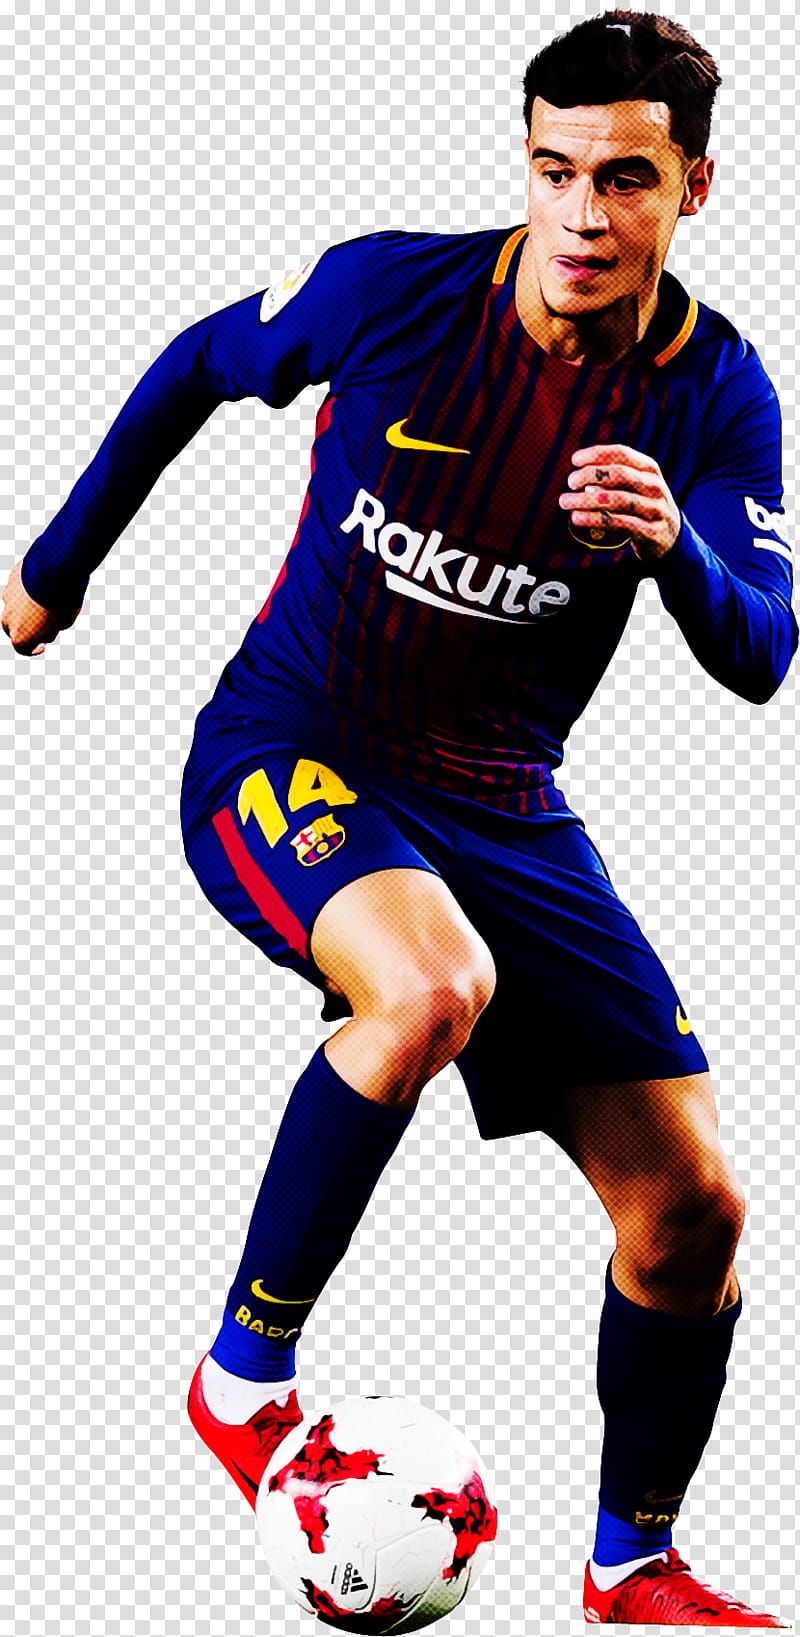 Football player, Philippe Coutinho, Fc Barcelona, Liverpool Fc, Brazil National Football Team, Sports, Midfielder, Sticker transparent background PNG clipart